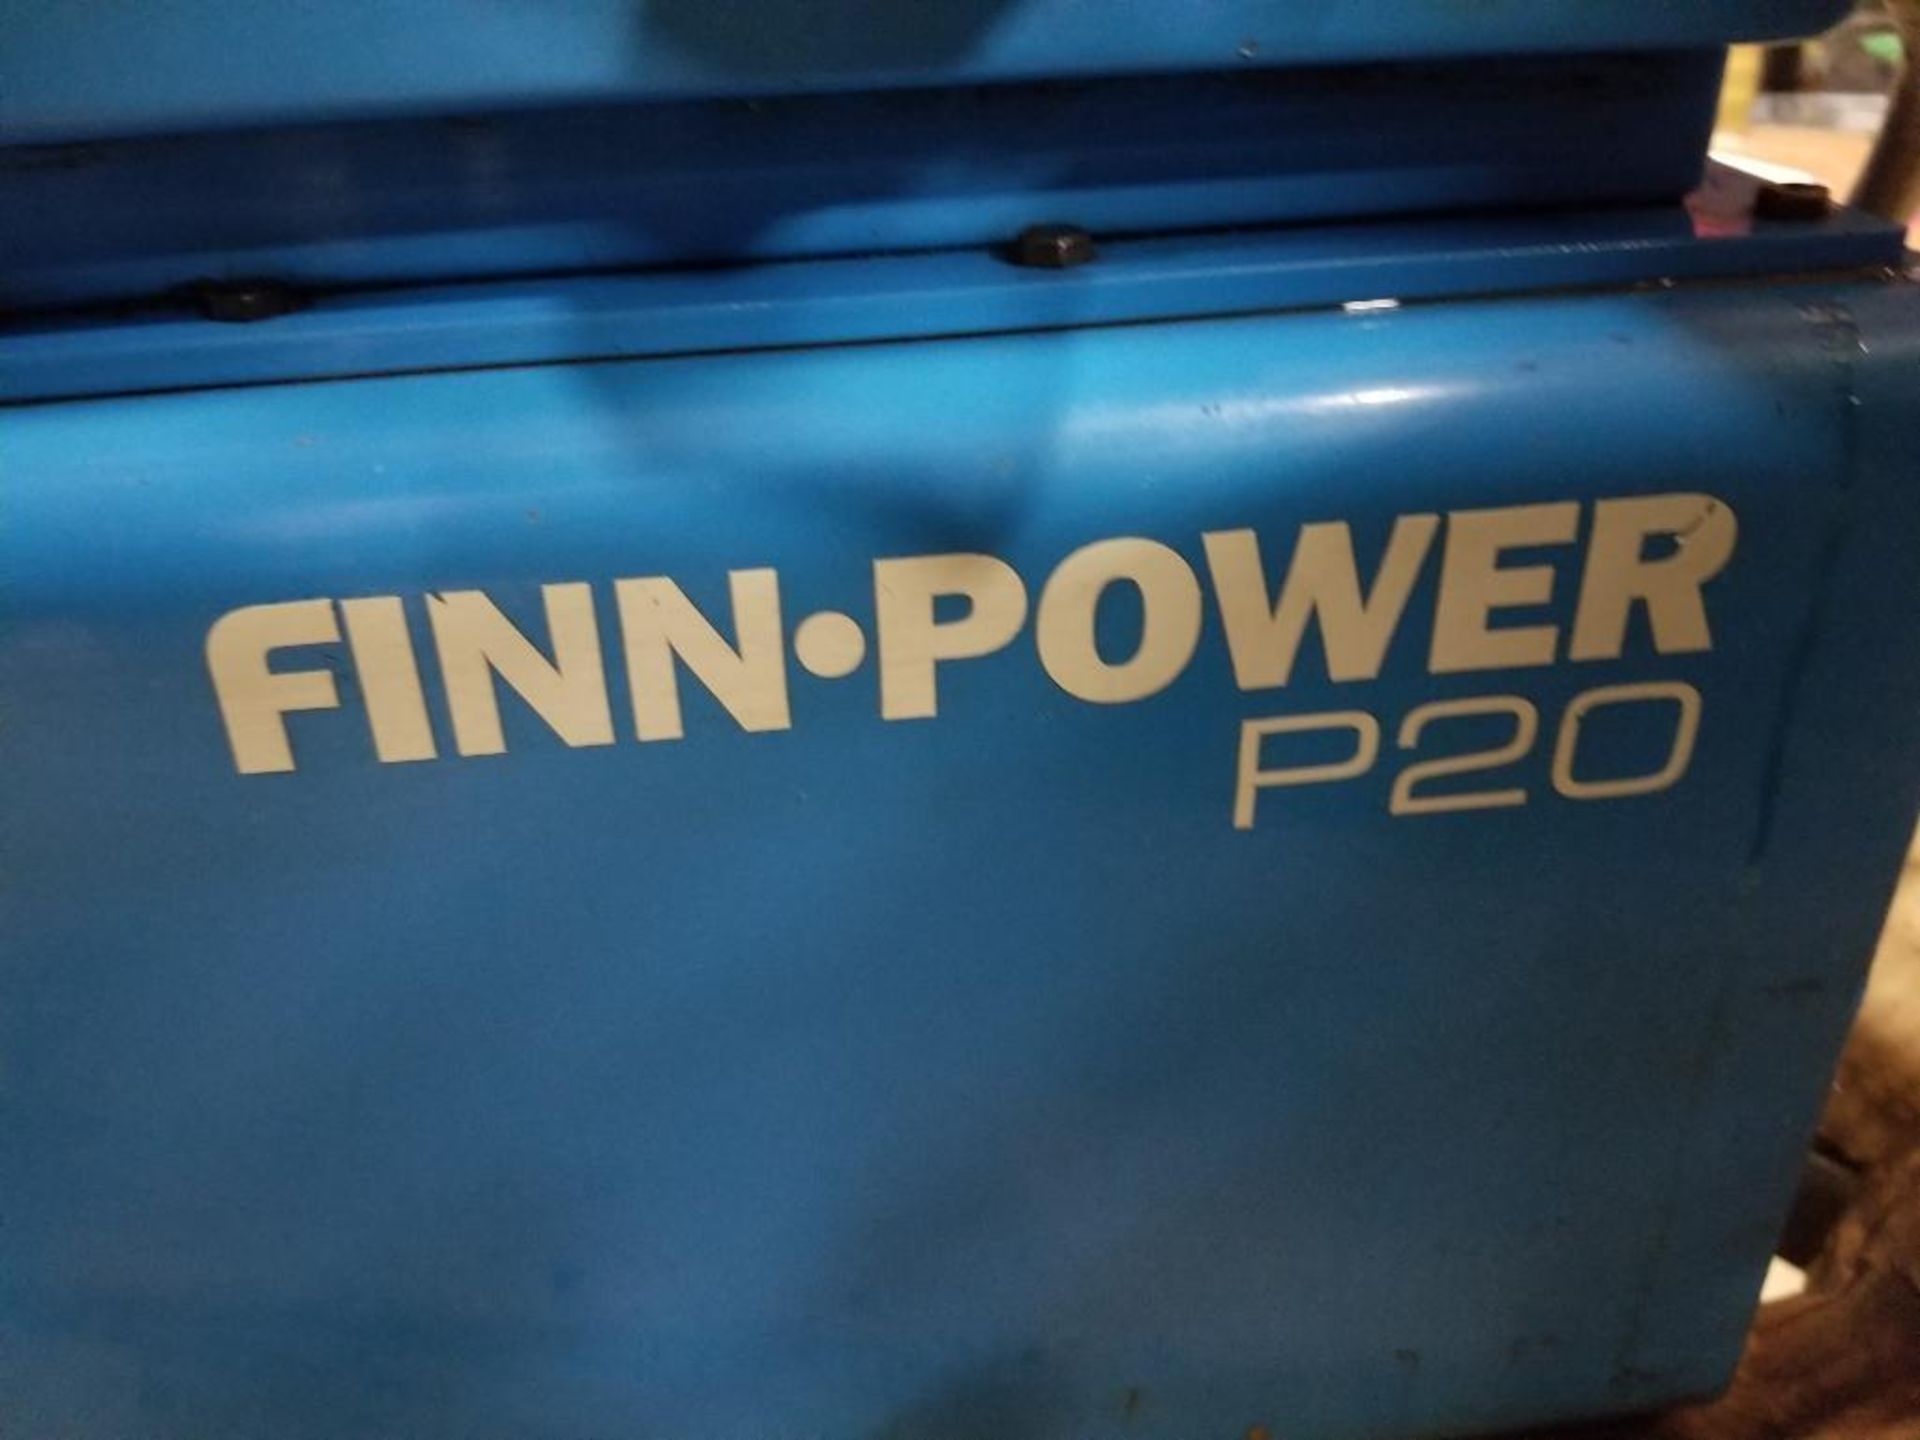 Finn-Power hydraulic swaging crimping machine. Model P20, Part number P20IS23. Mfg date 2005. - Image 3 of 16